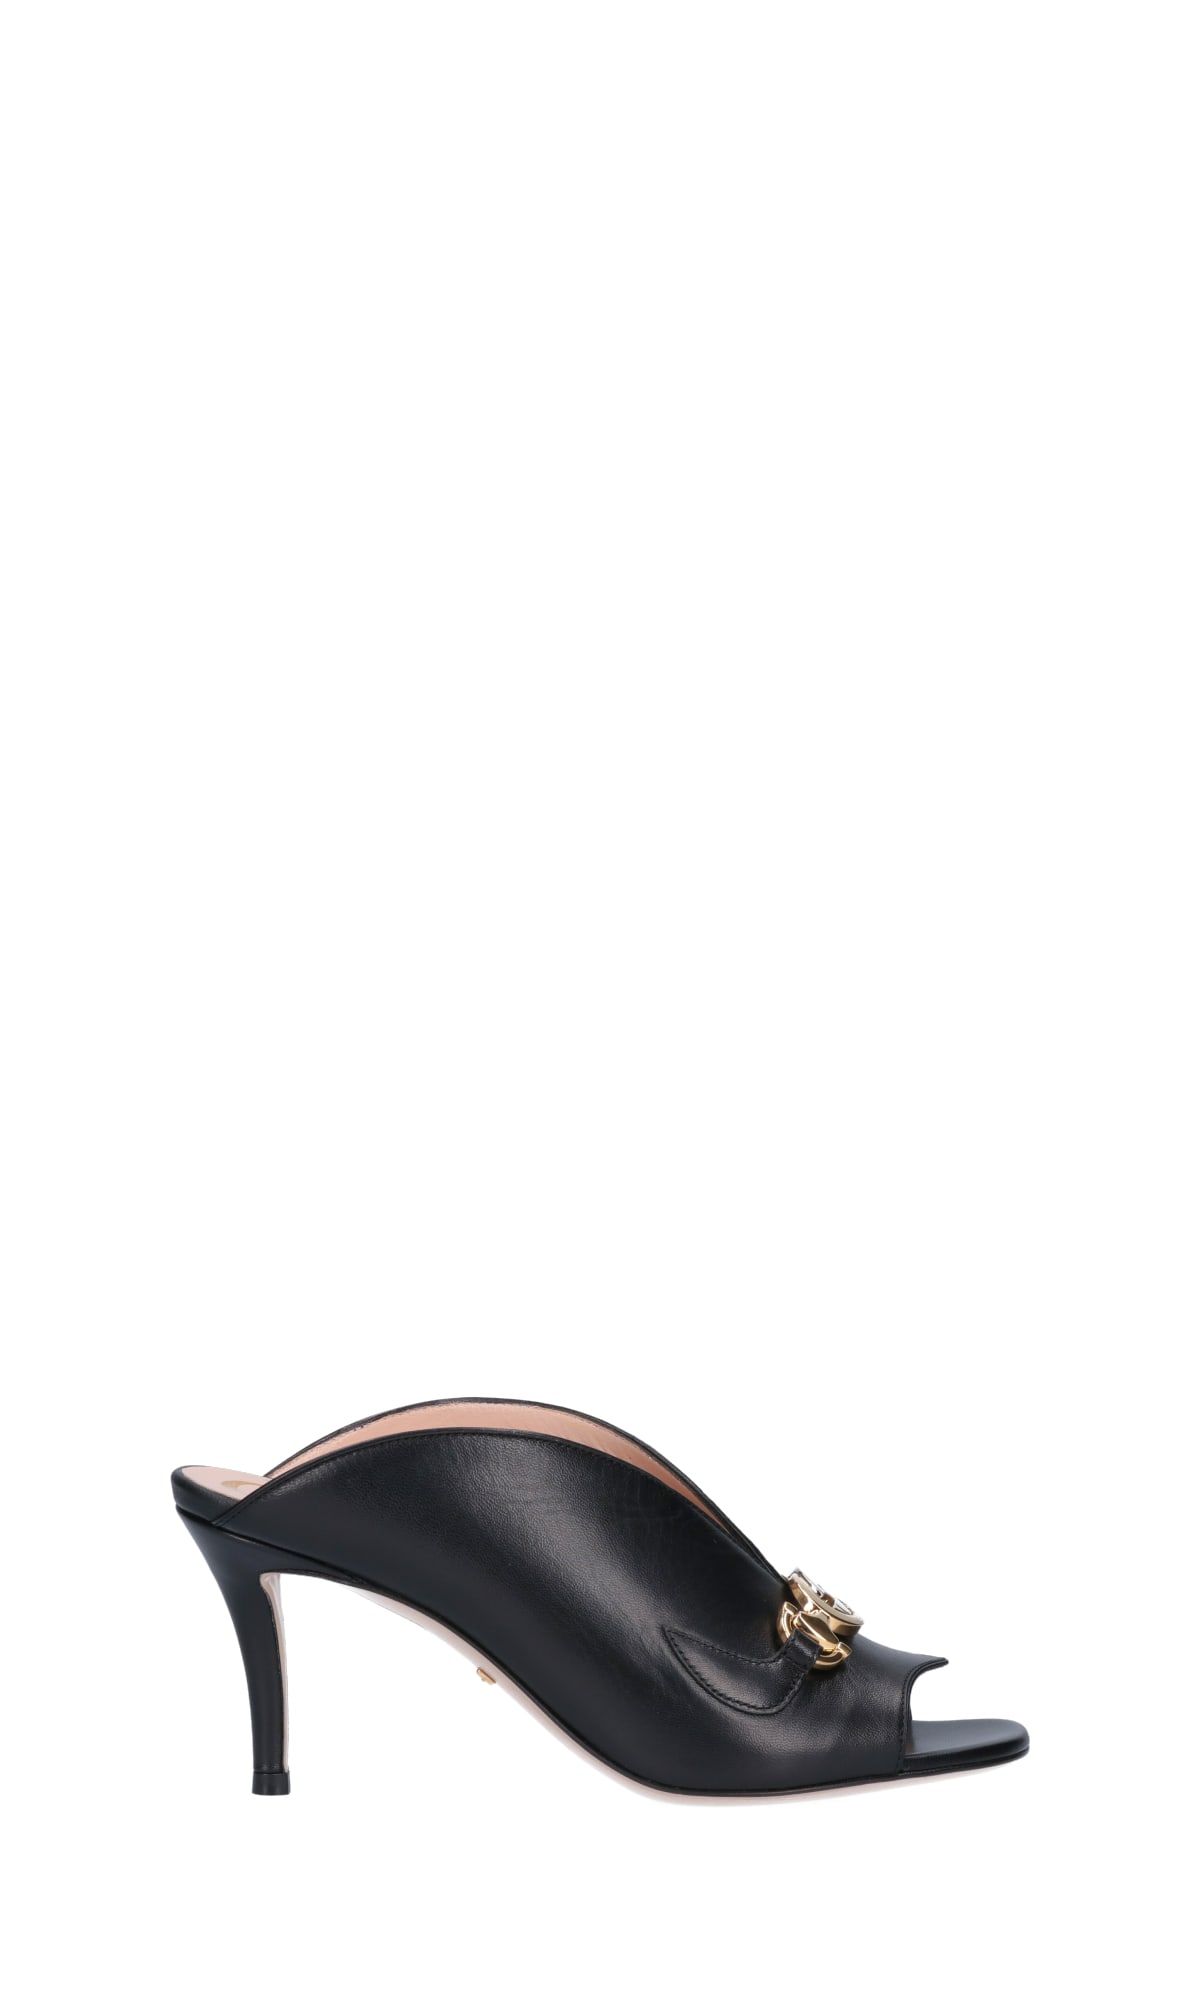 Buy Gucci Flat Shoes online, shop Gucci shoes with free shipping